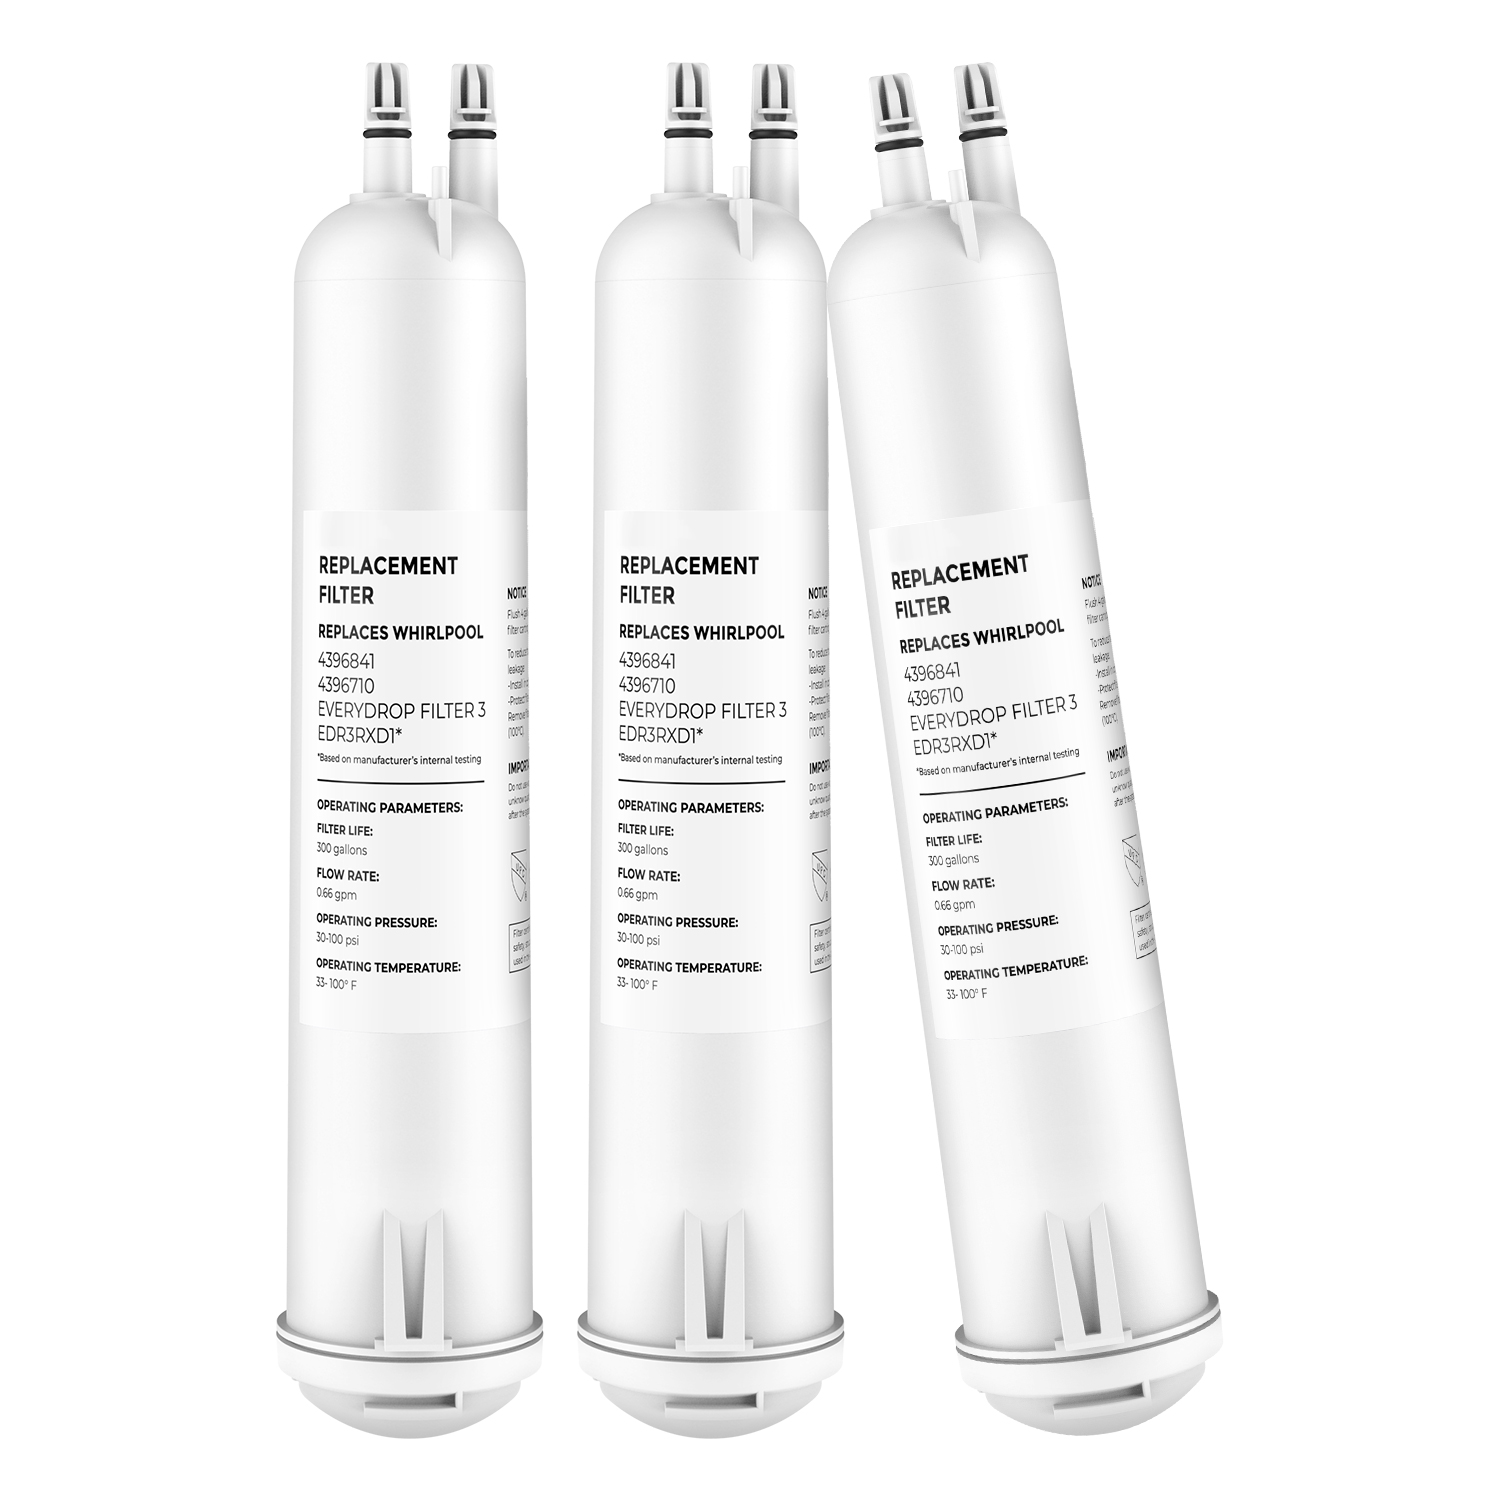 Compatible EDR3RXD1 4396841 4396710 46-90302 Refrigerator Water Filter by Pzfilters 3Pk